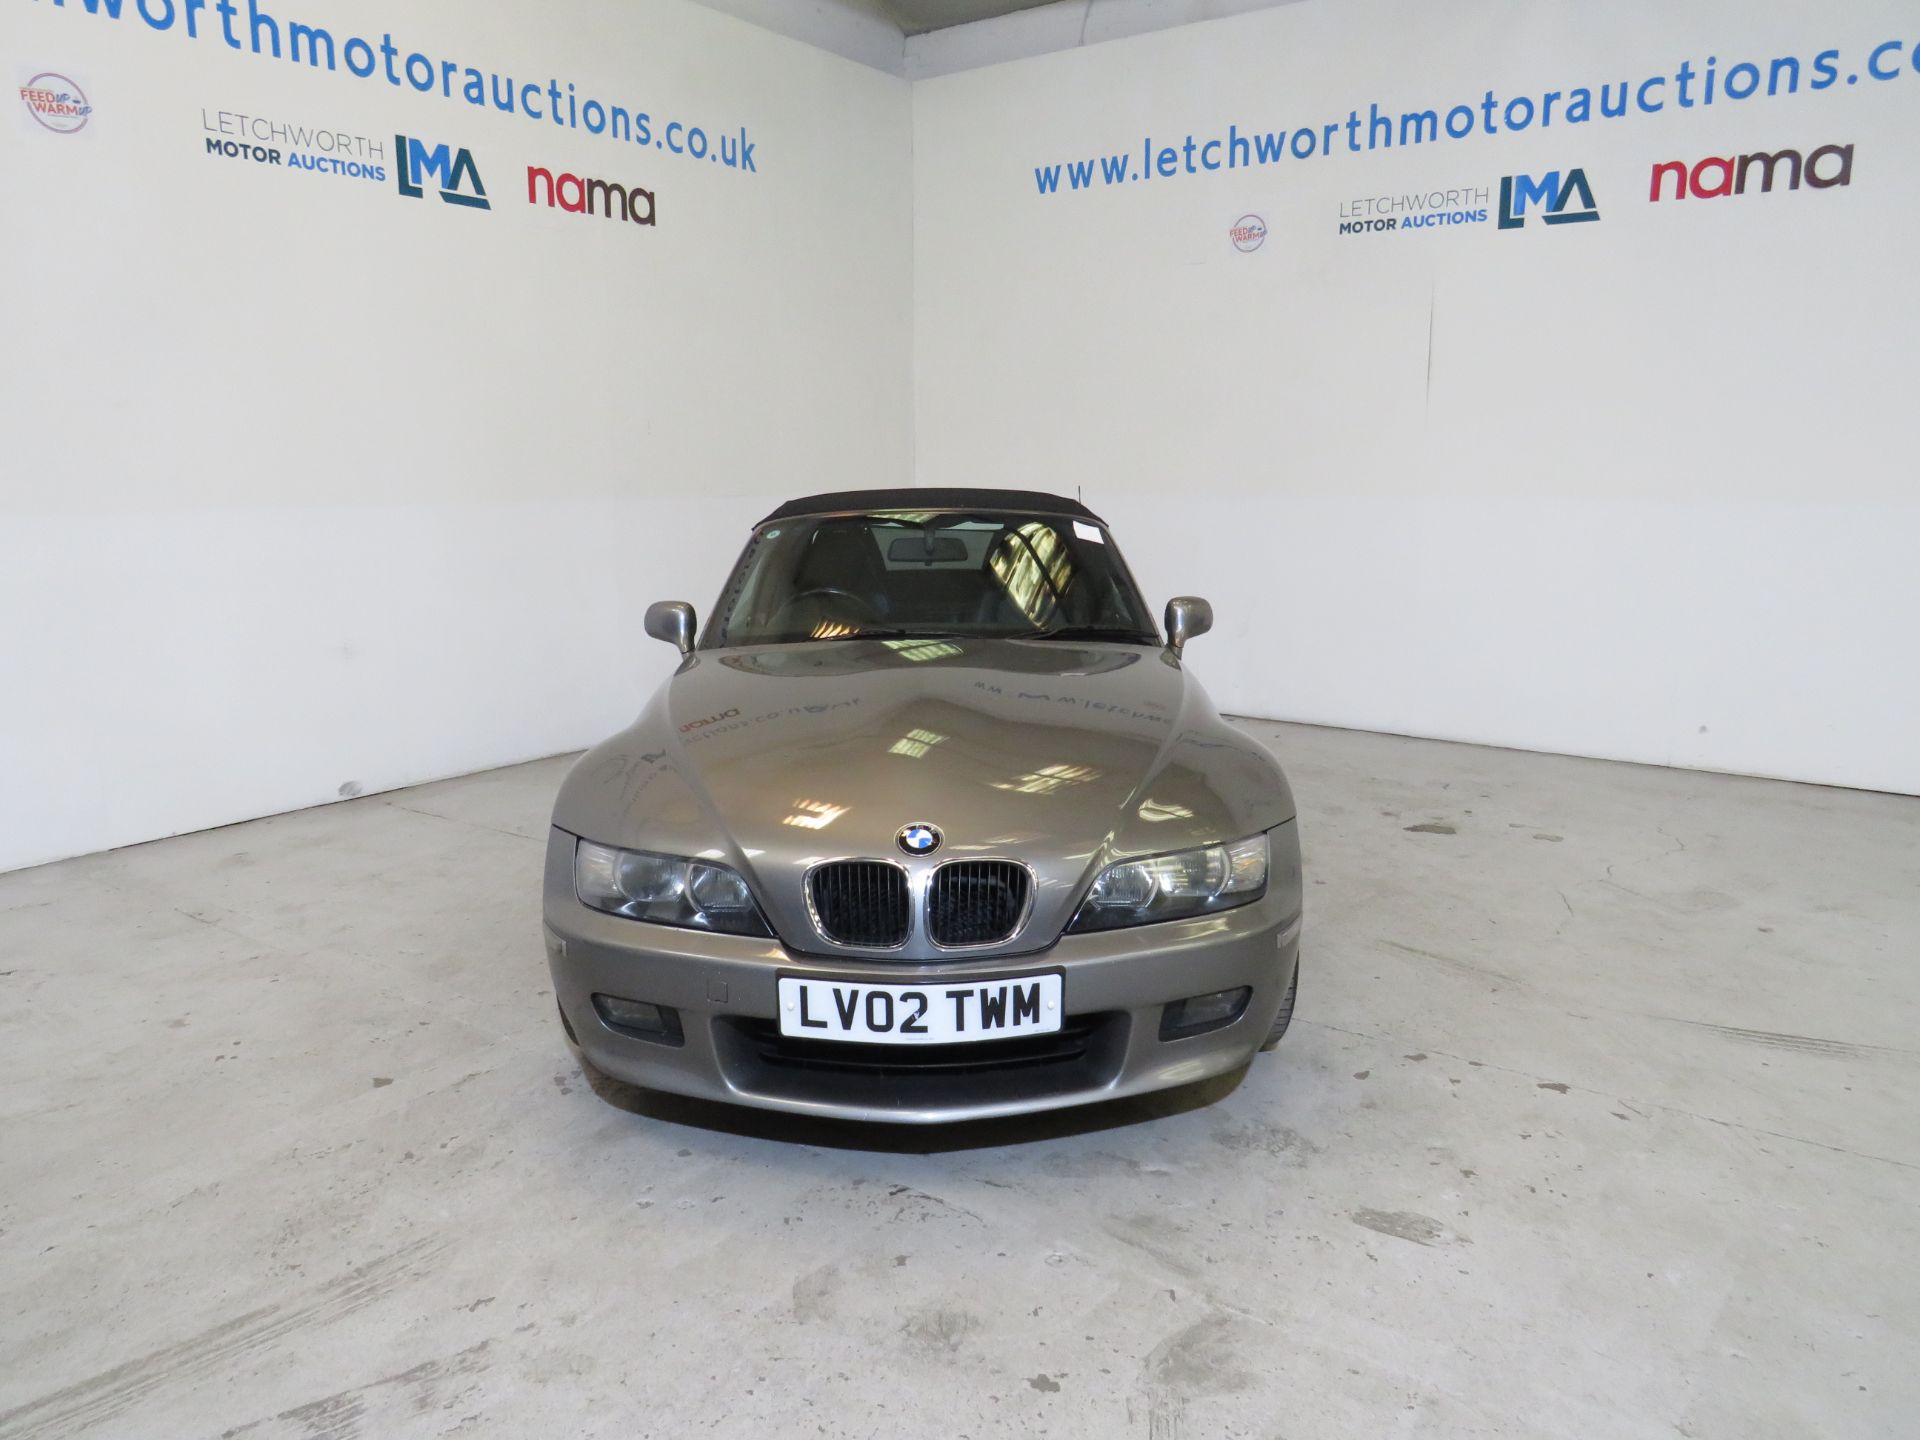 2002 BMW Z3 Convertible 2171cc - Image 4 of 21